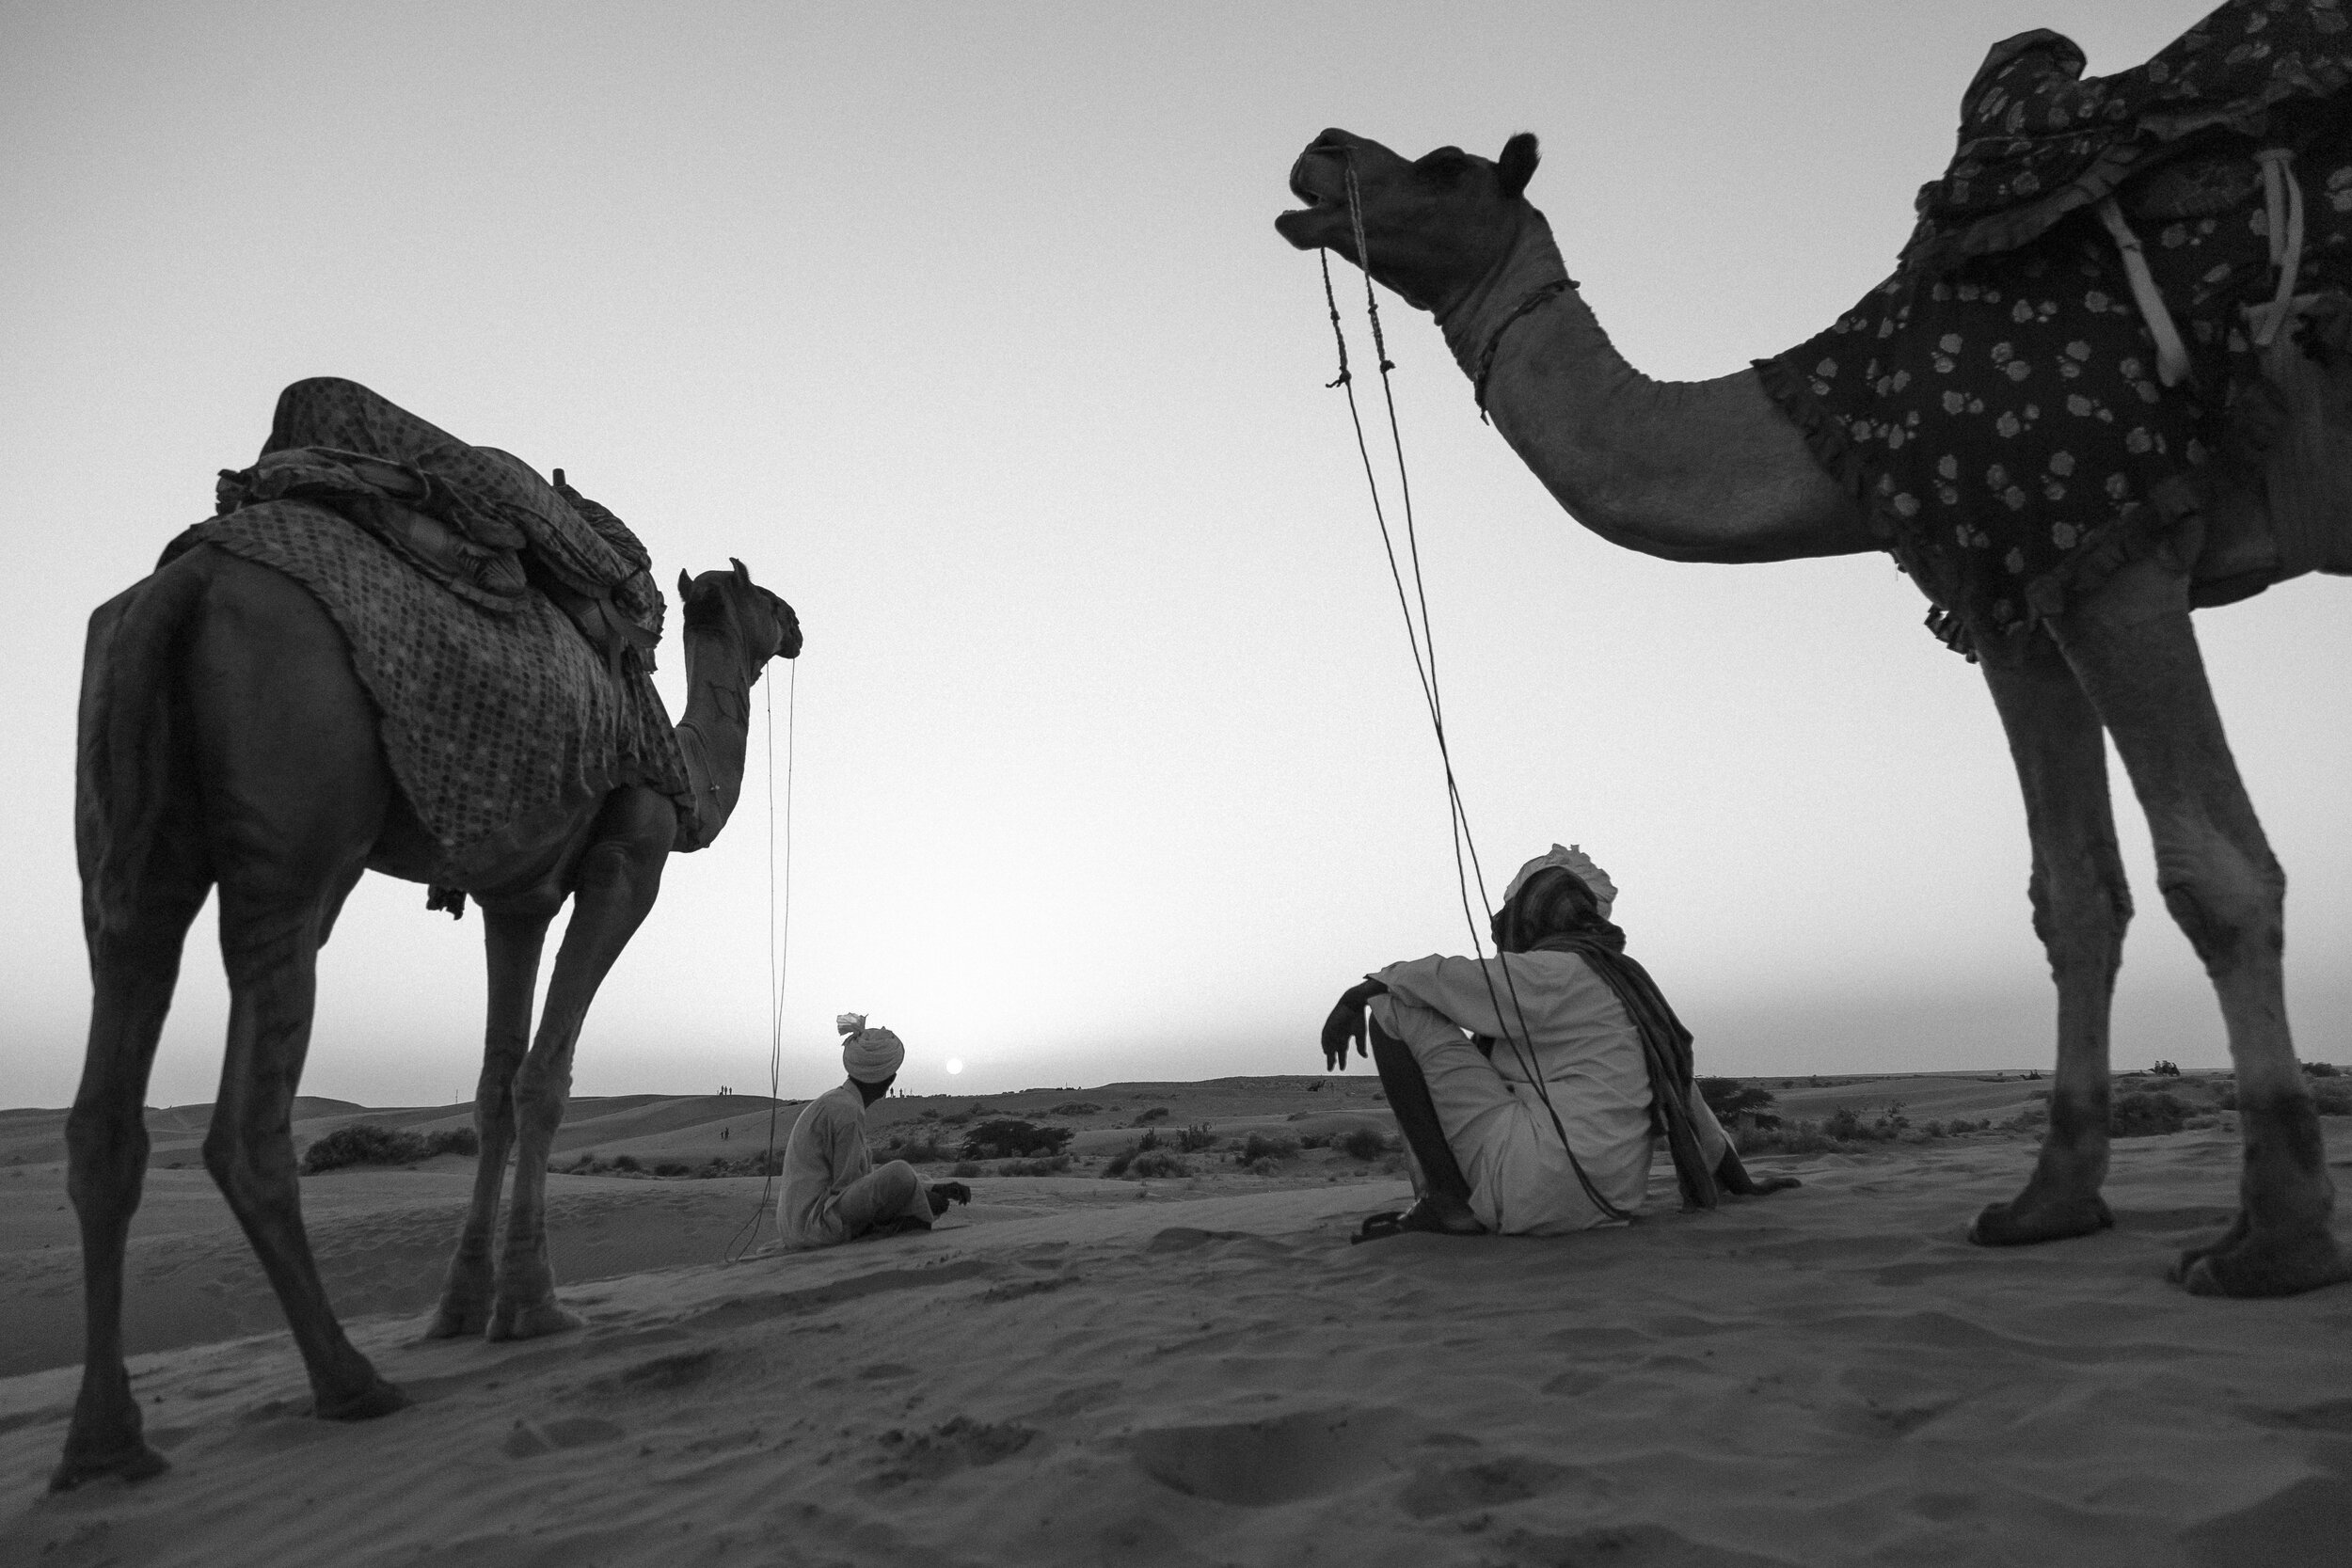 Camelmen resting and enjoying a sunset at Sam dunes of famous Th